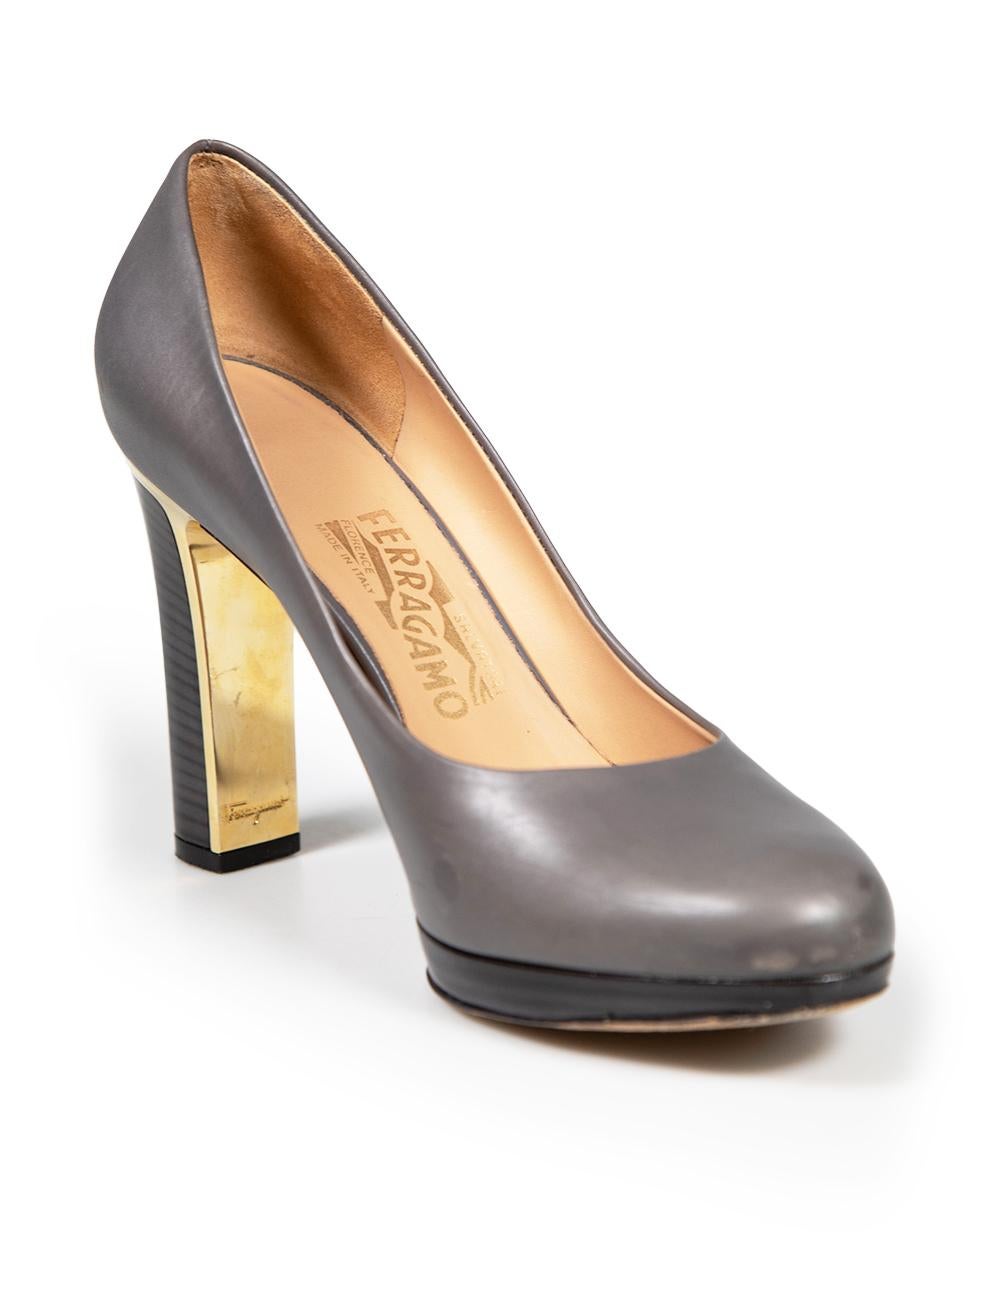 CONDITION is Very good. Minimal wear to pumps is evident. Minimal abrasions to the tip and back of both shoes. Small scratches on the front, sides, back and heels of both shoes on this used Salvatore Ferragamo designer resale item. This item comes